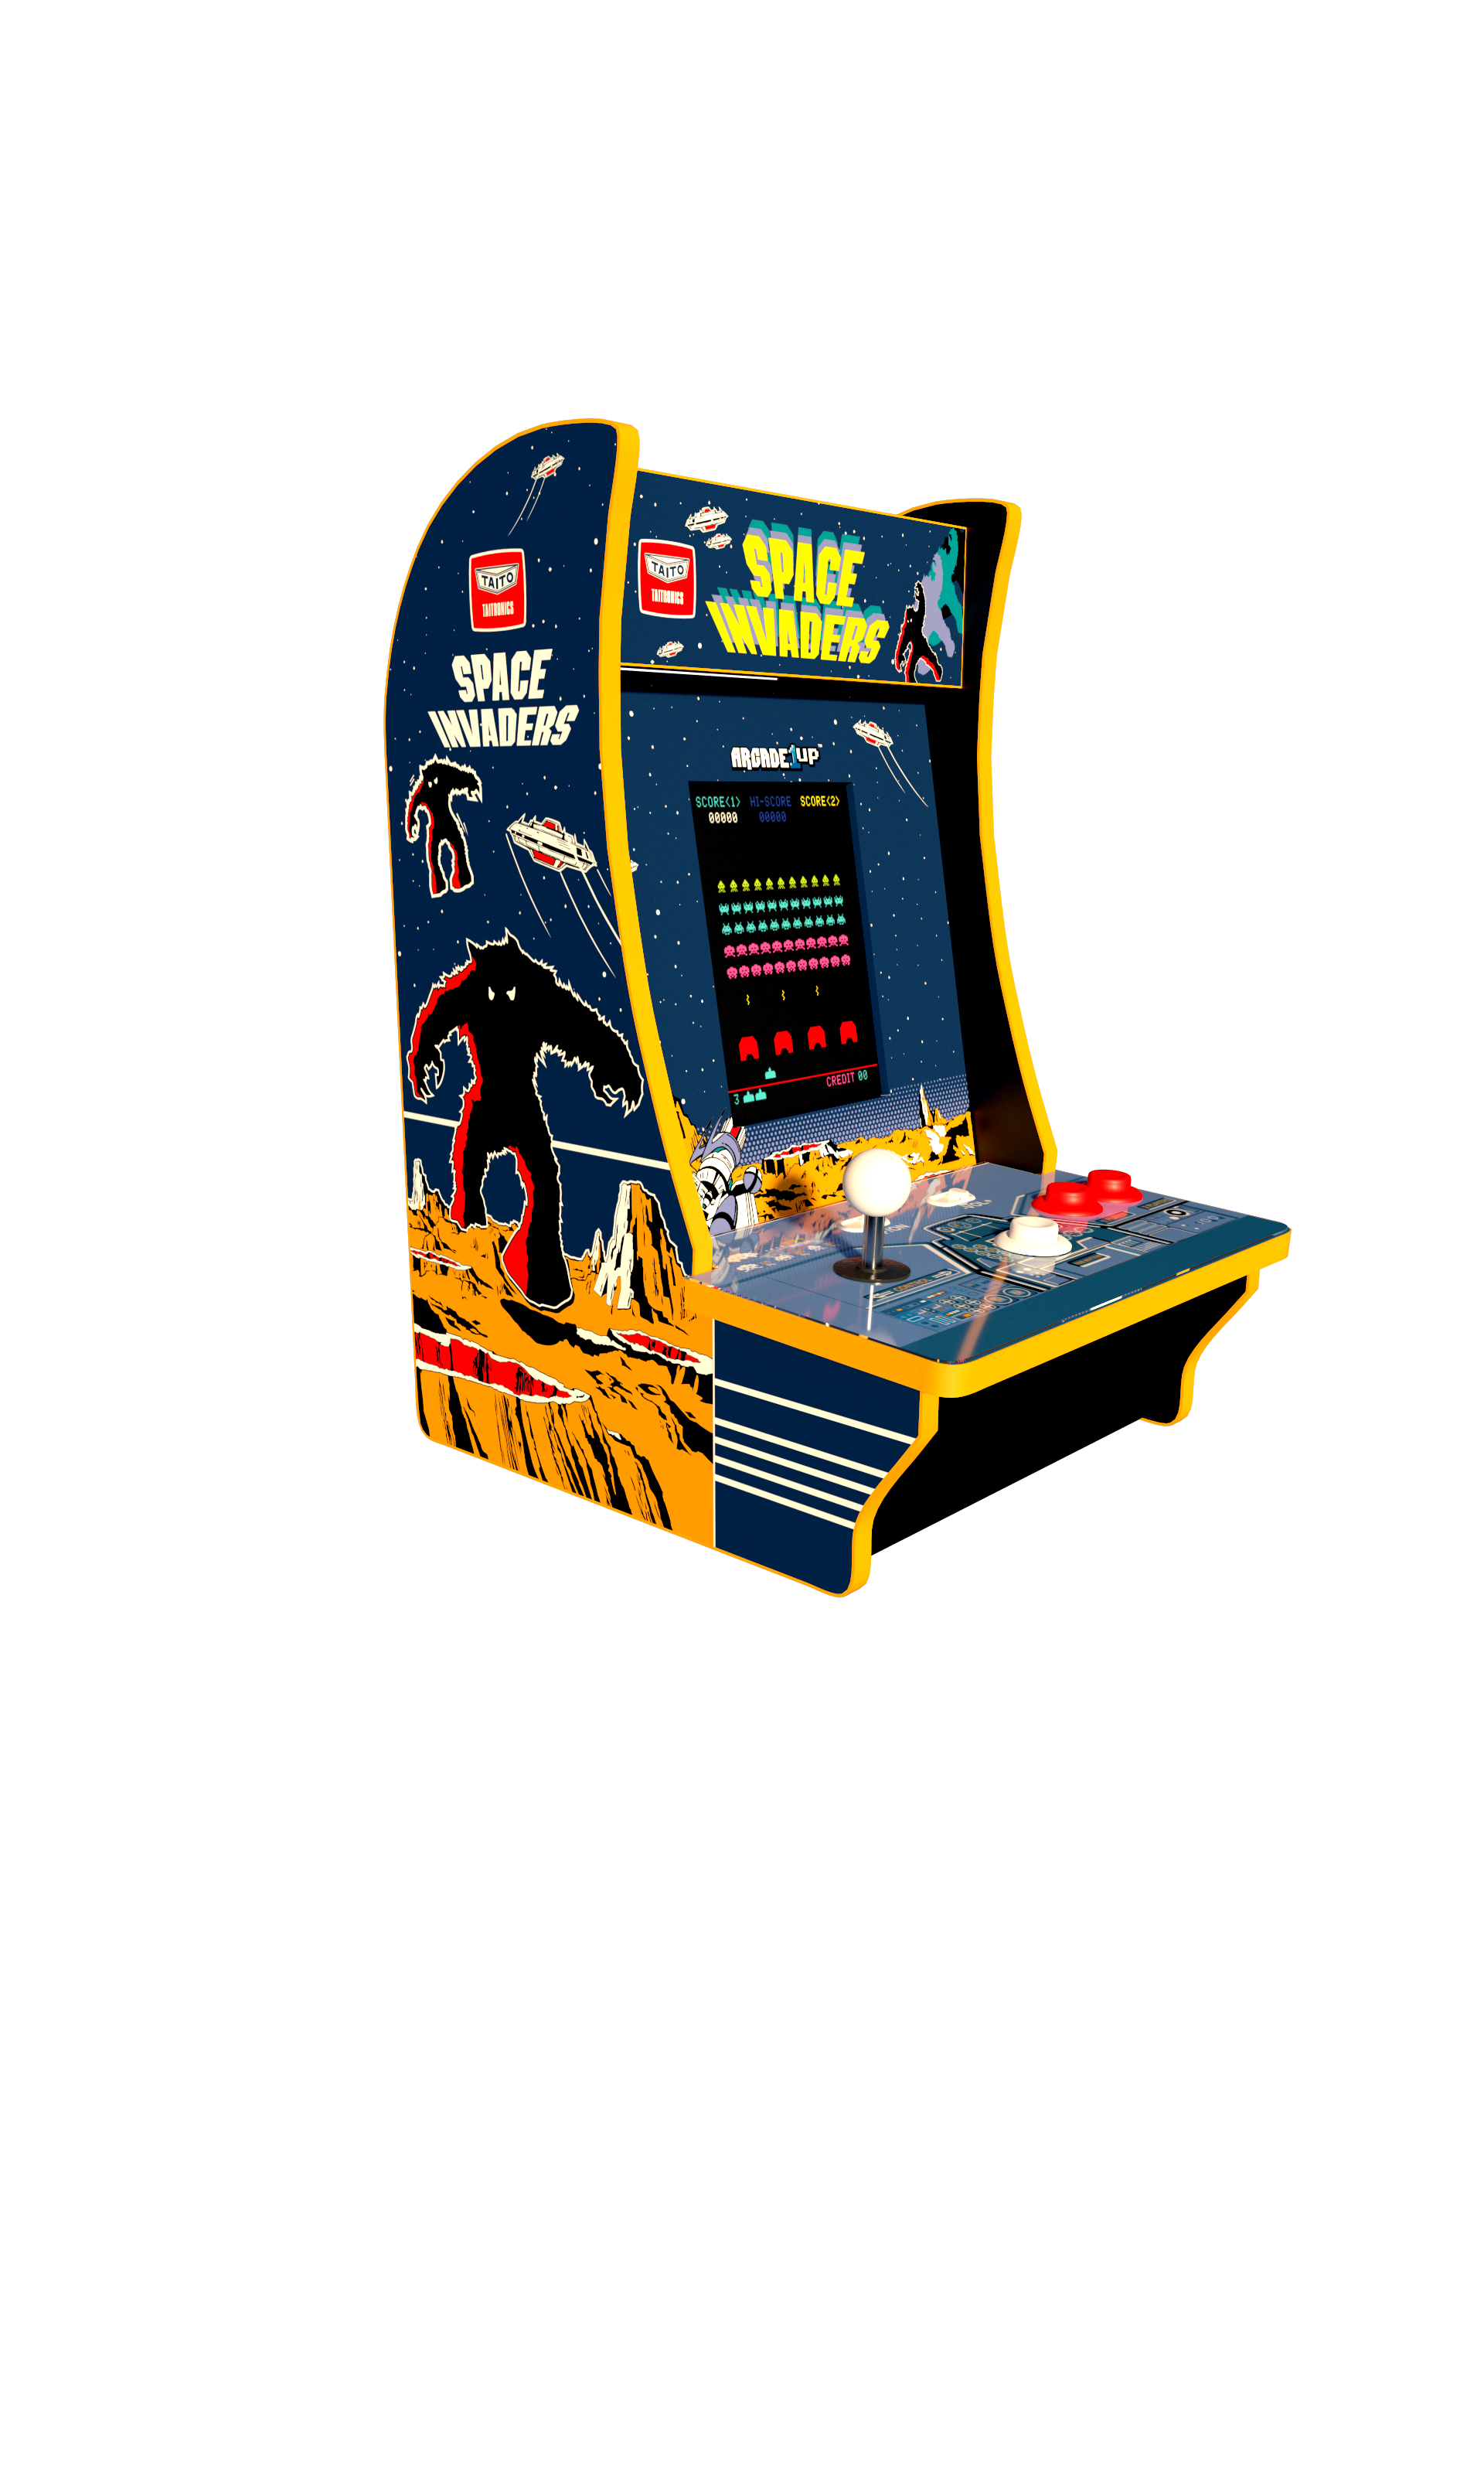 Space Invaders Counter Arcade Machine, Arcade1UP - image 5 of 8